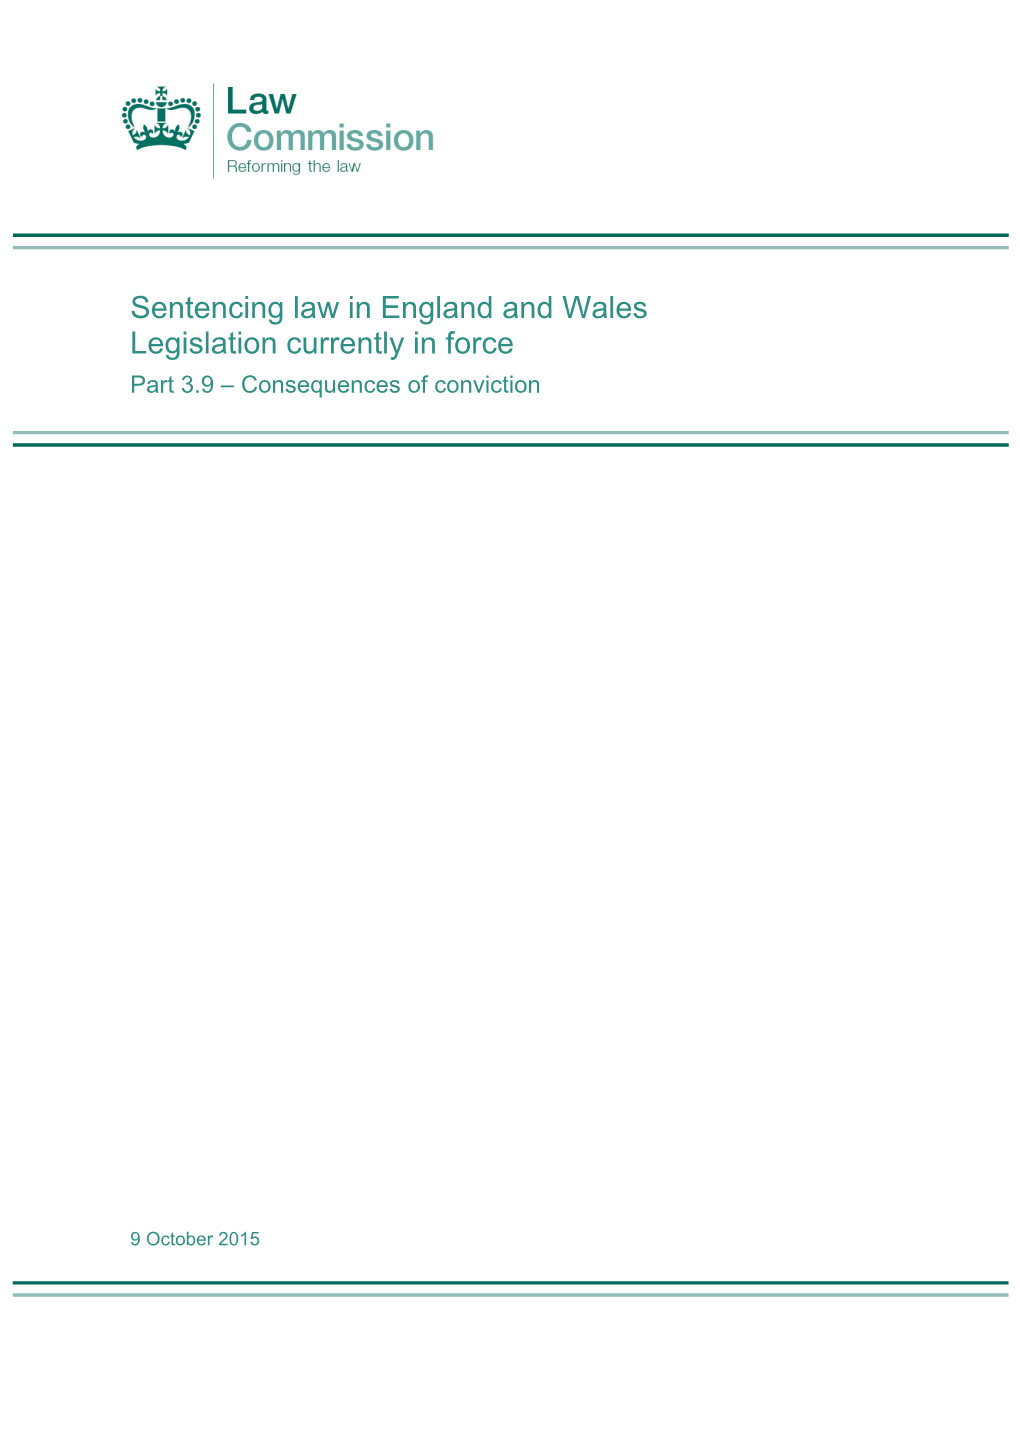 Sentencing Law in England and Wales Legislation Currently in Force